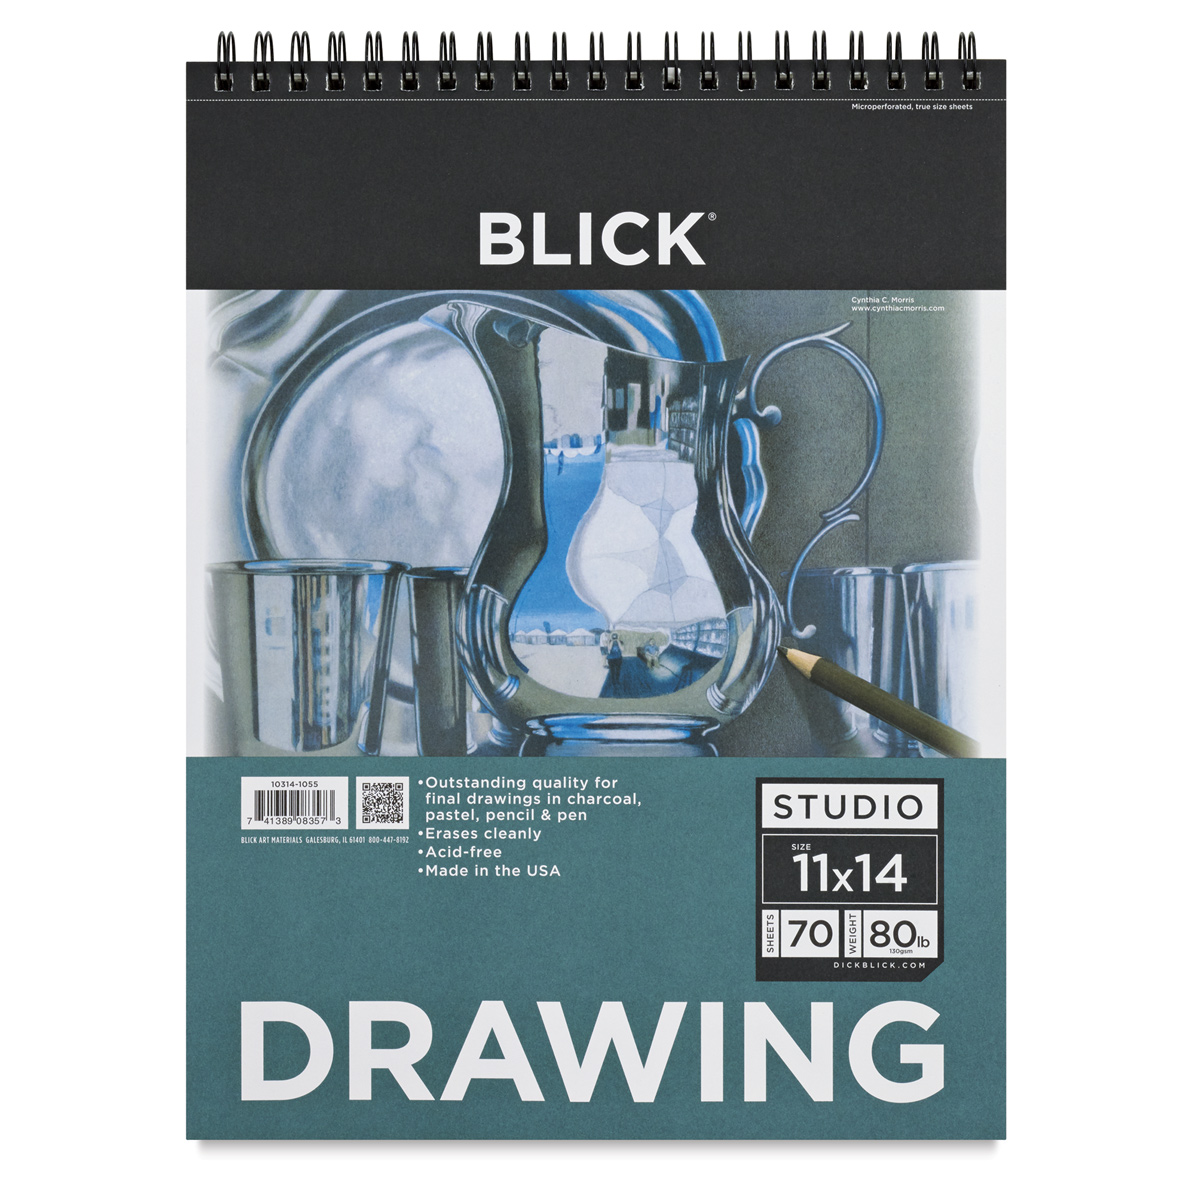 Blick Brand Products